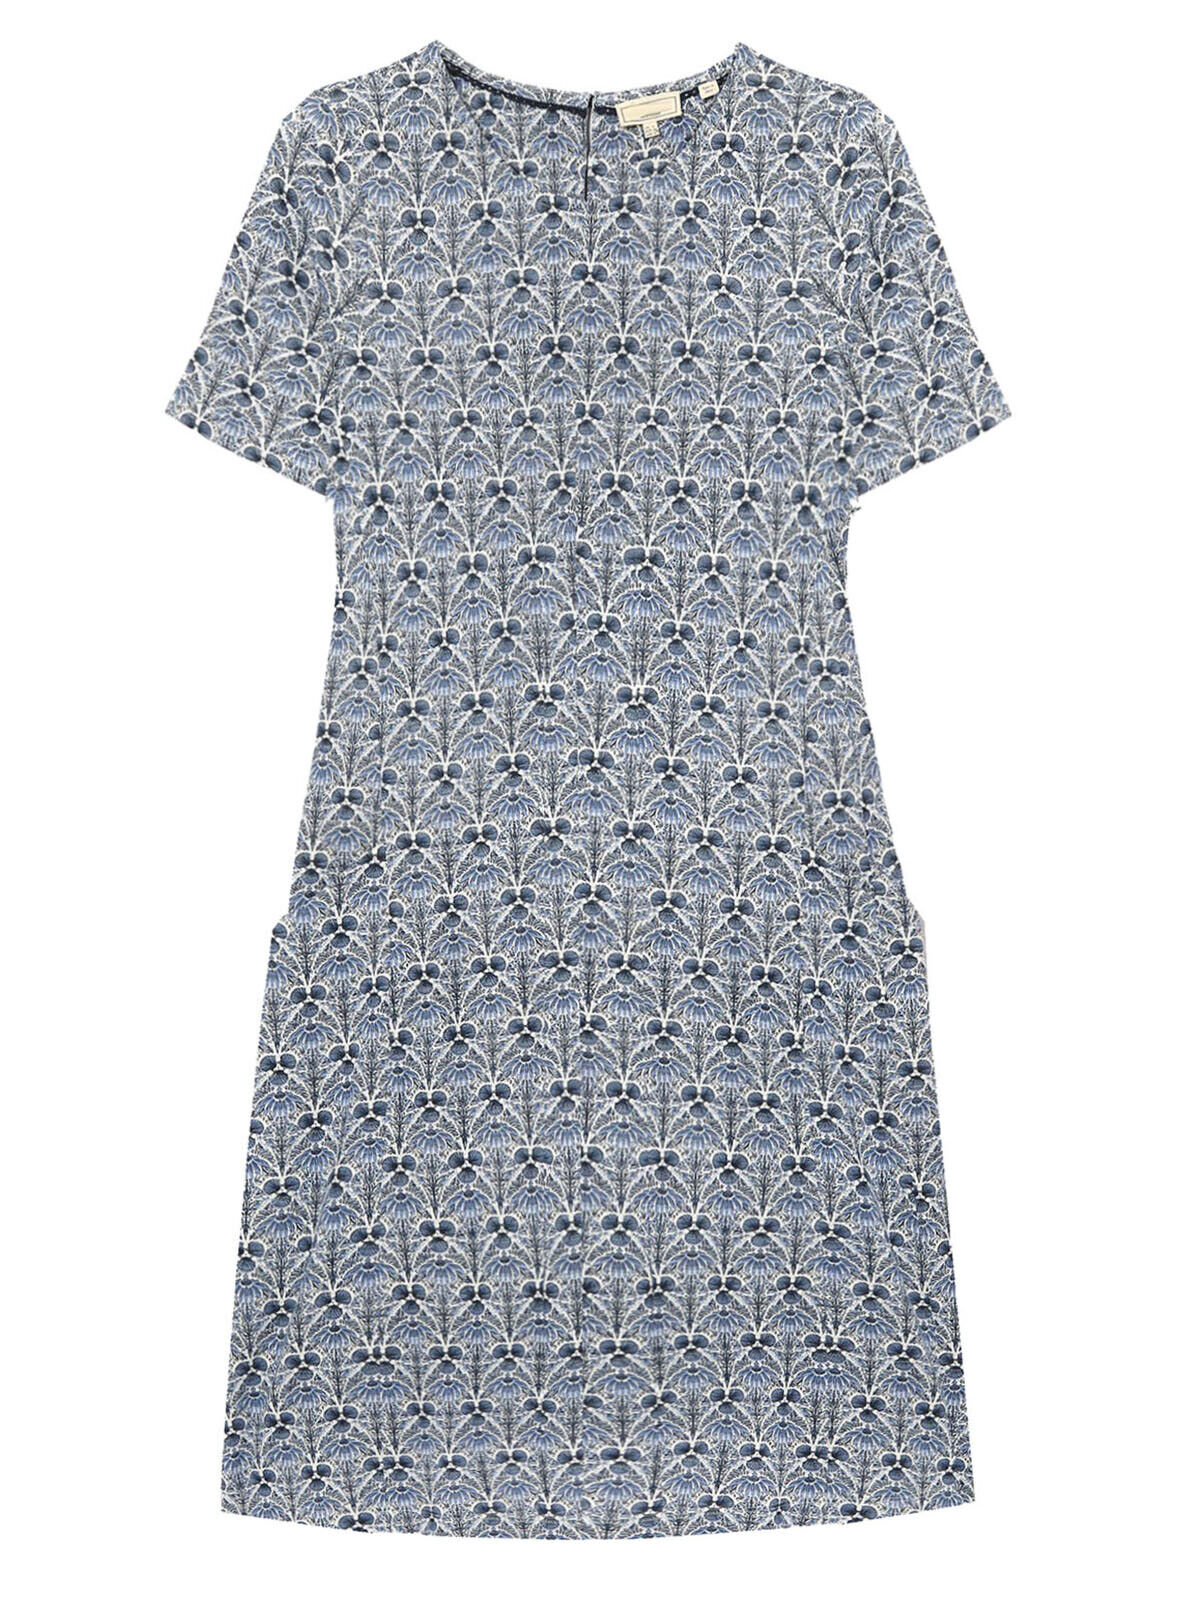 EX Fat Face Mid Blue Simone Sea Floral Jersey Dress in Sizes 8-24 RRP £46